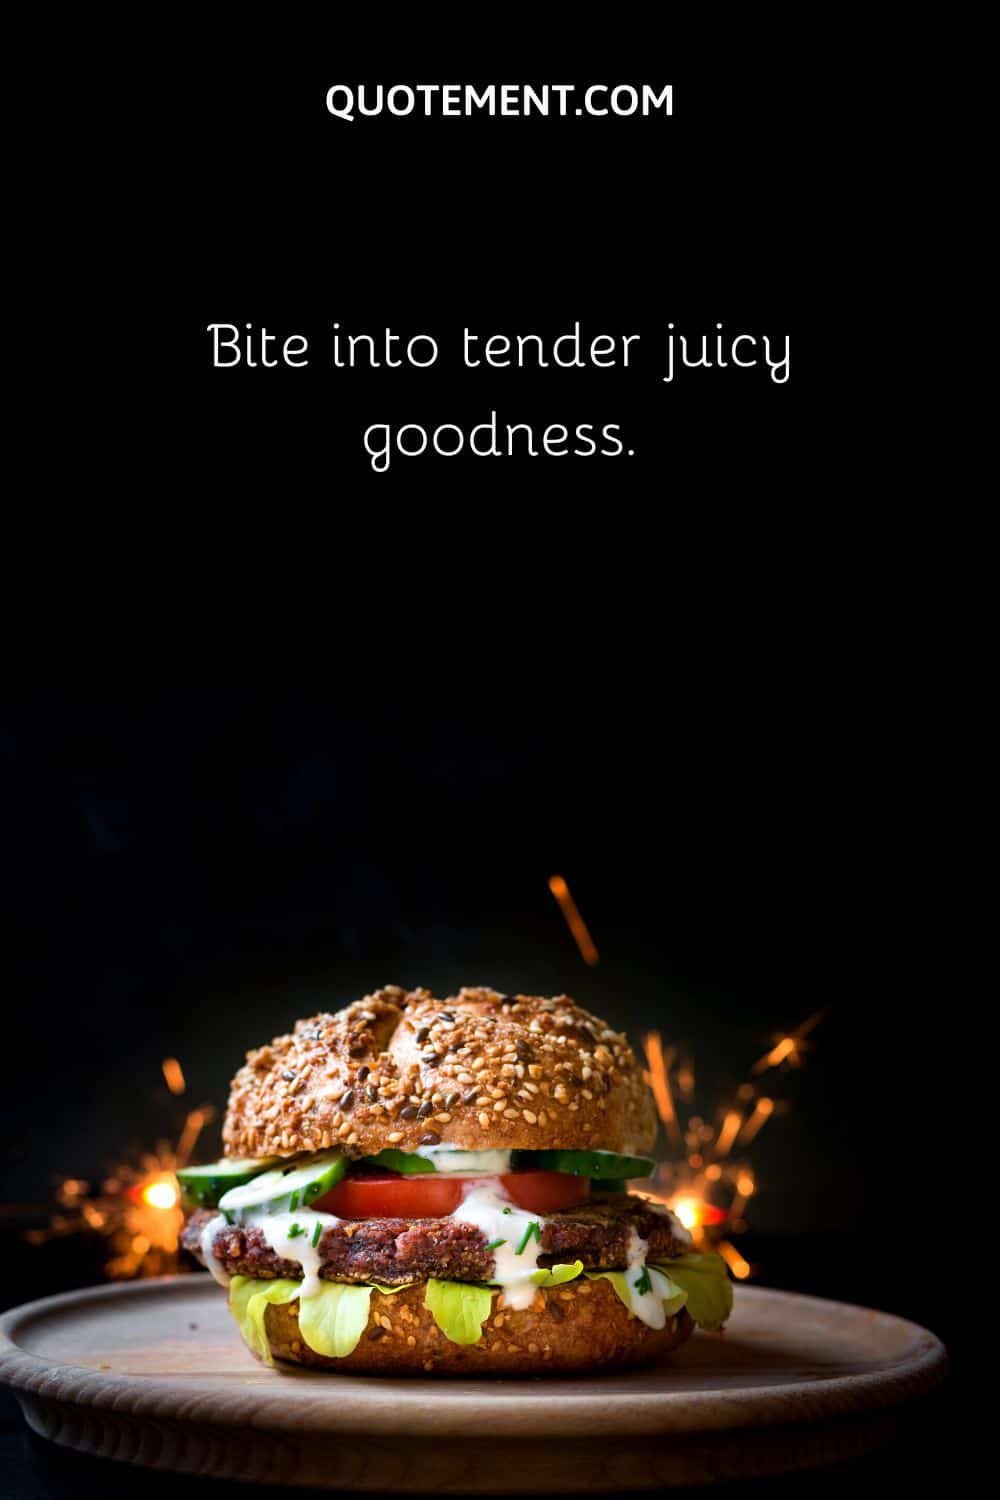 Bite into tender juicy goodness.